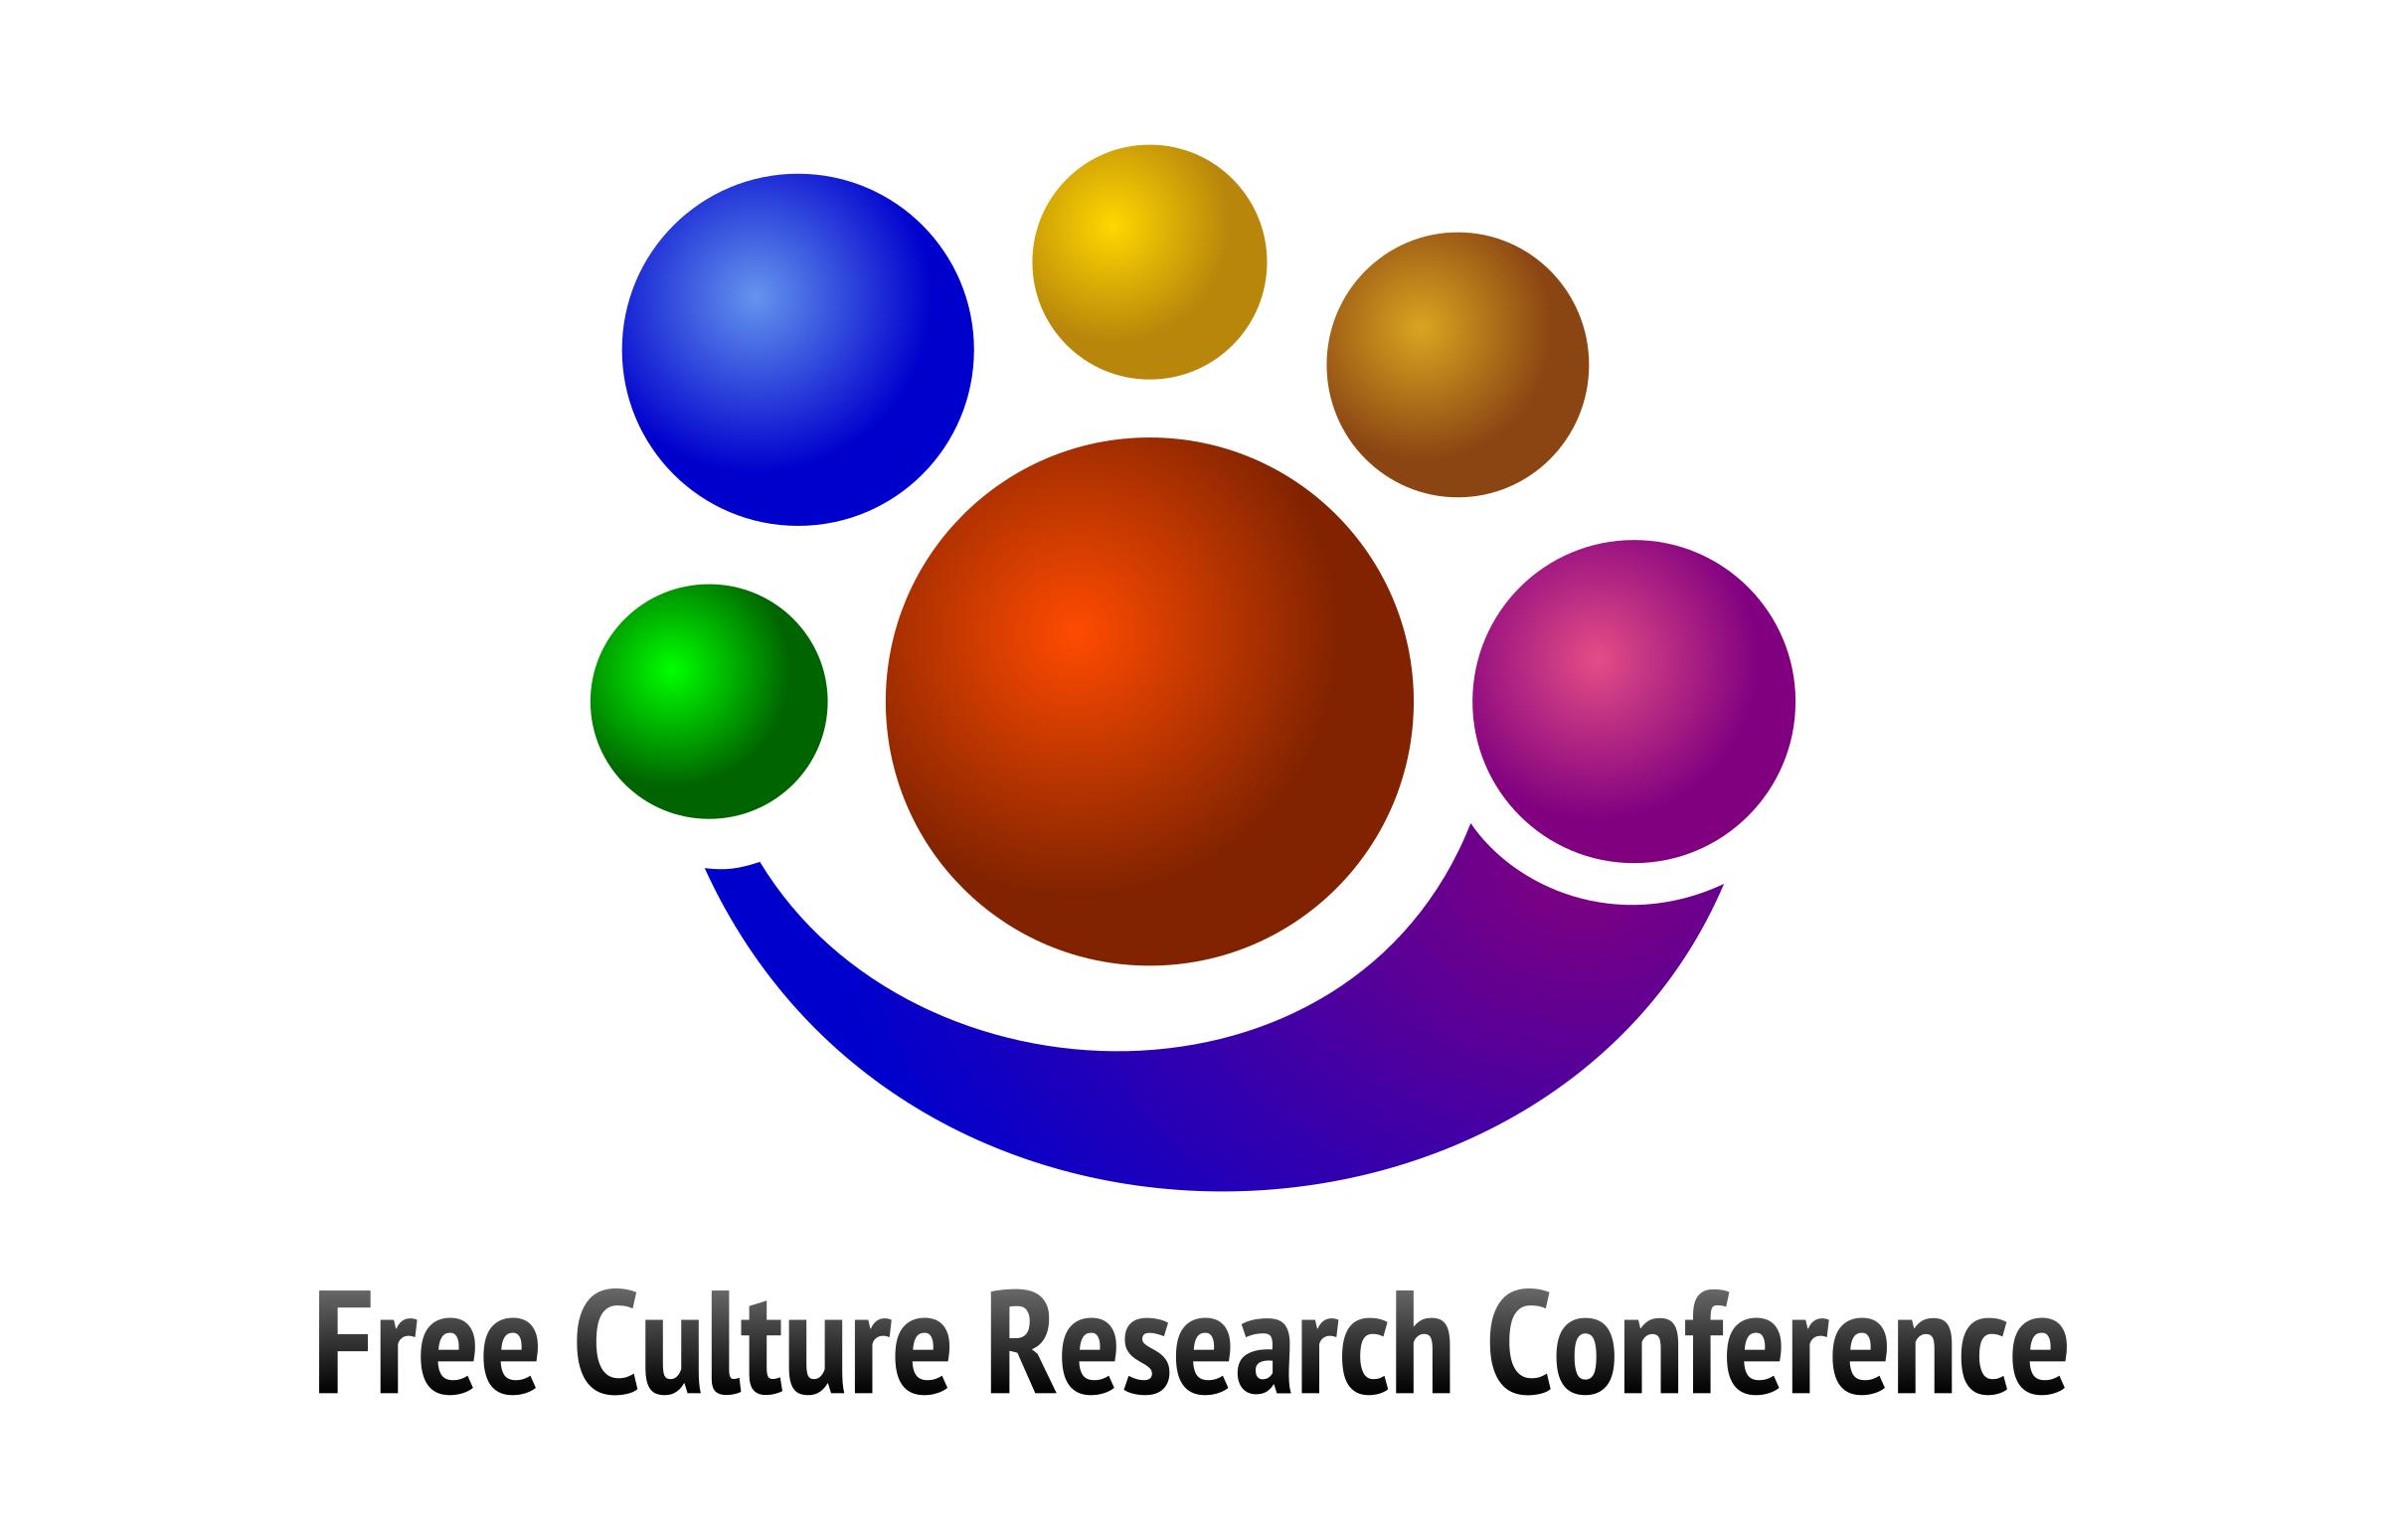 Free Culture Research Conference Logo icons